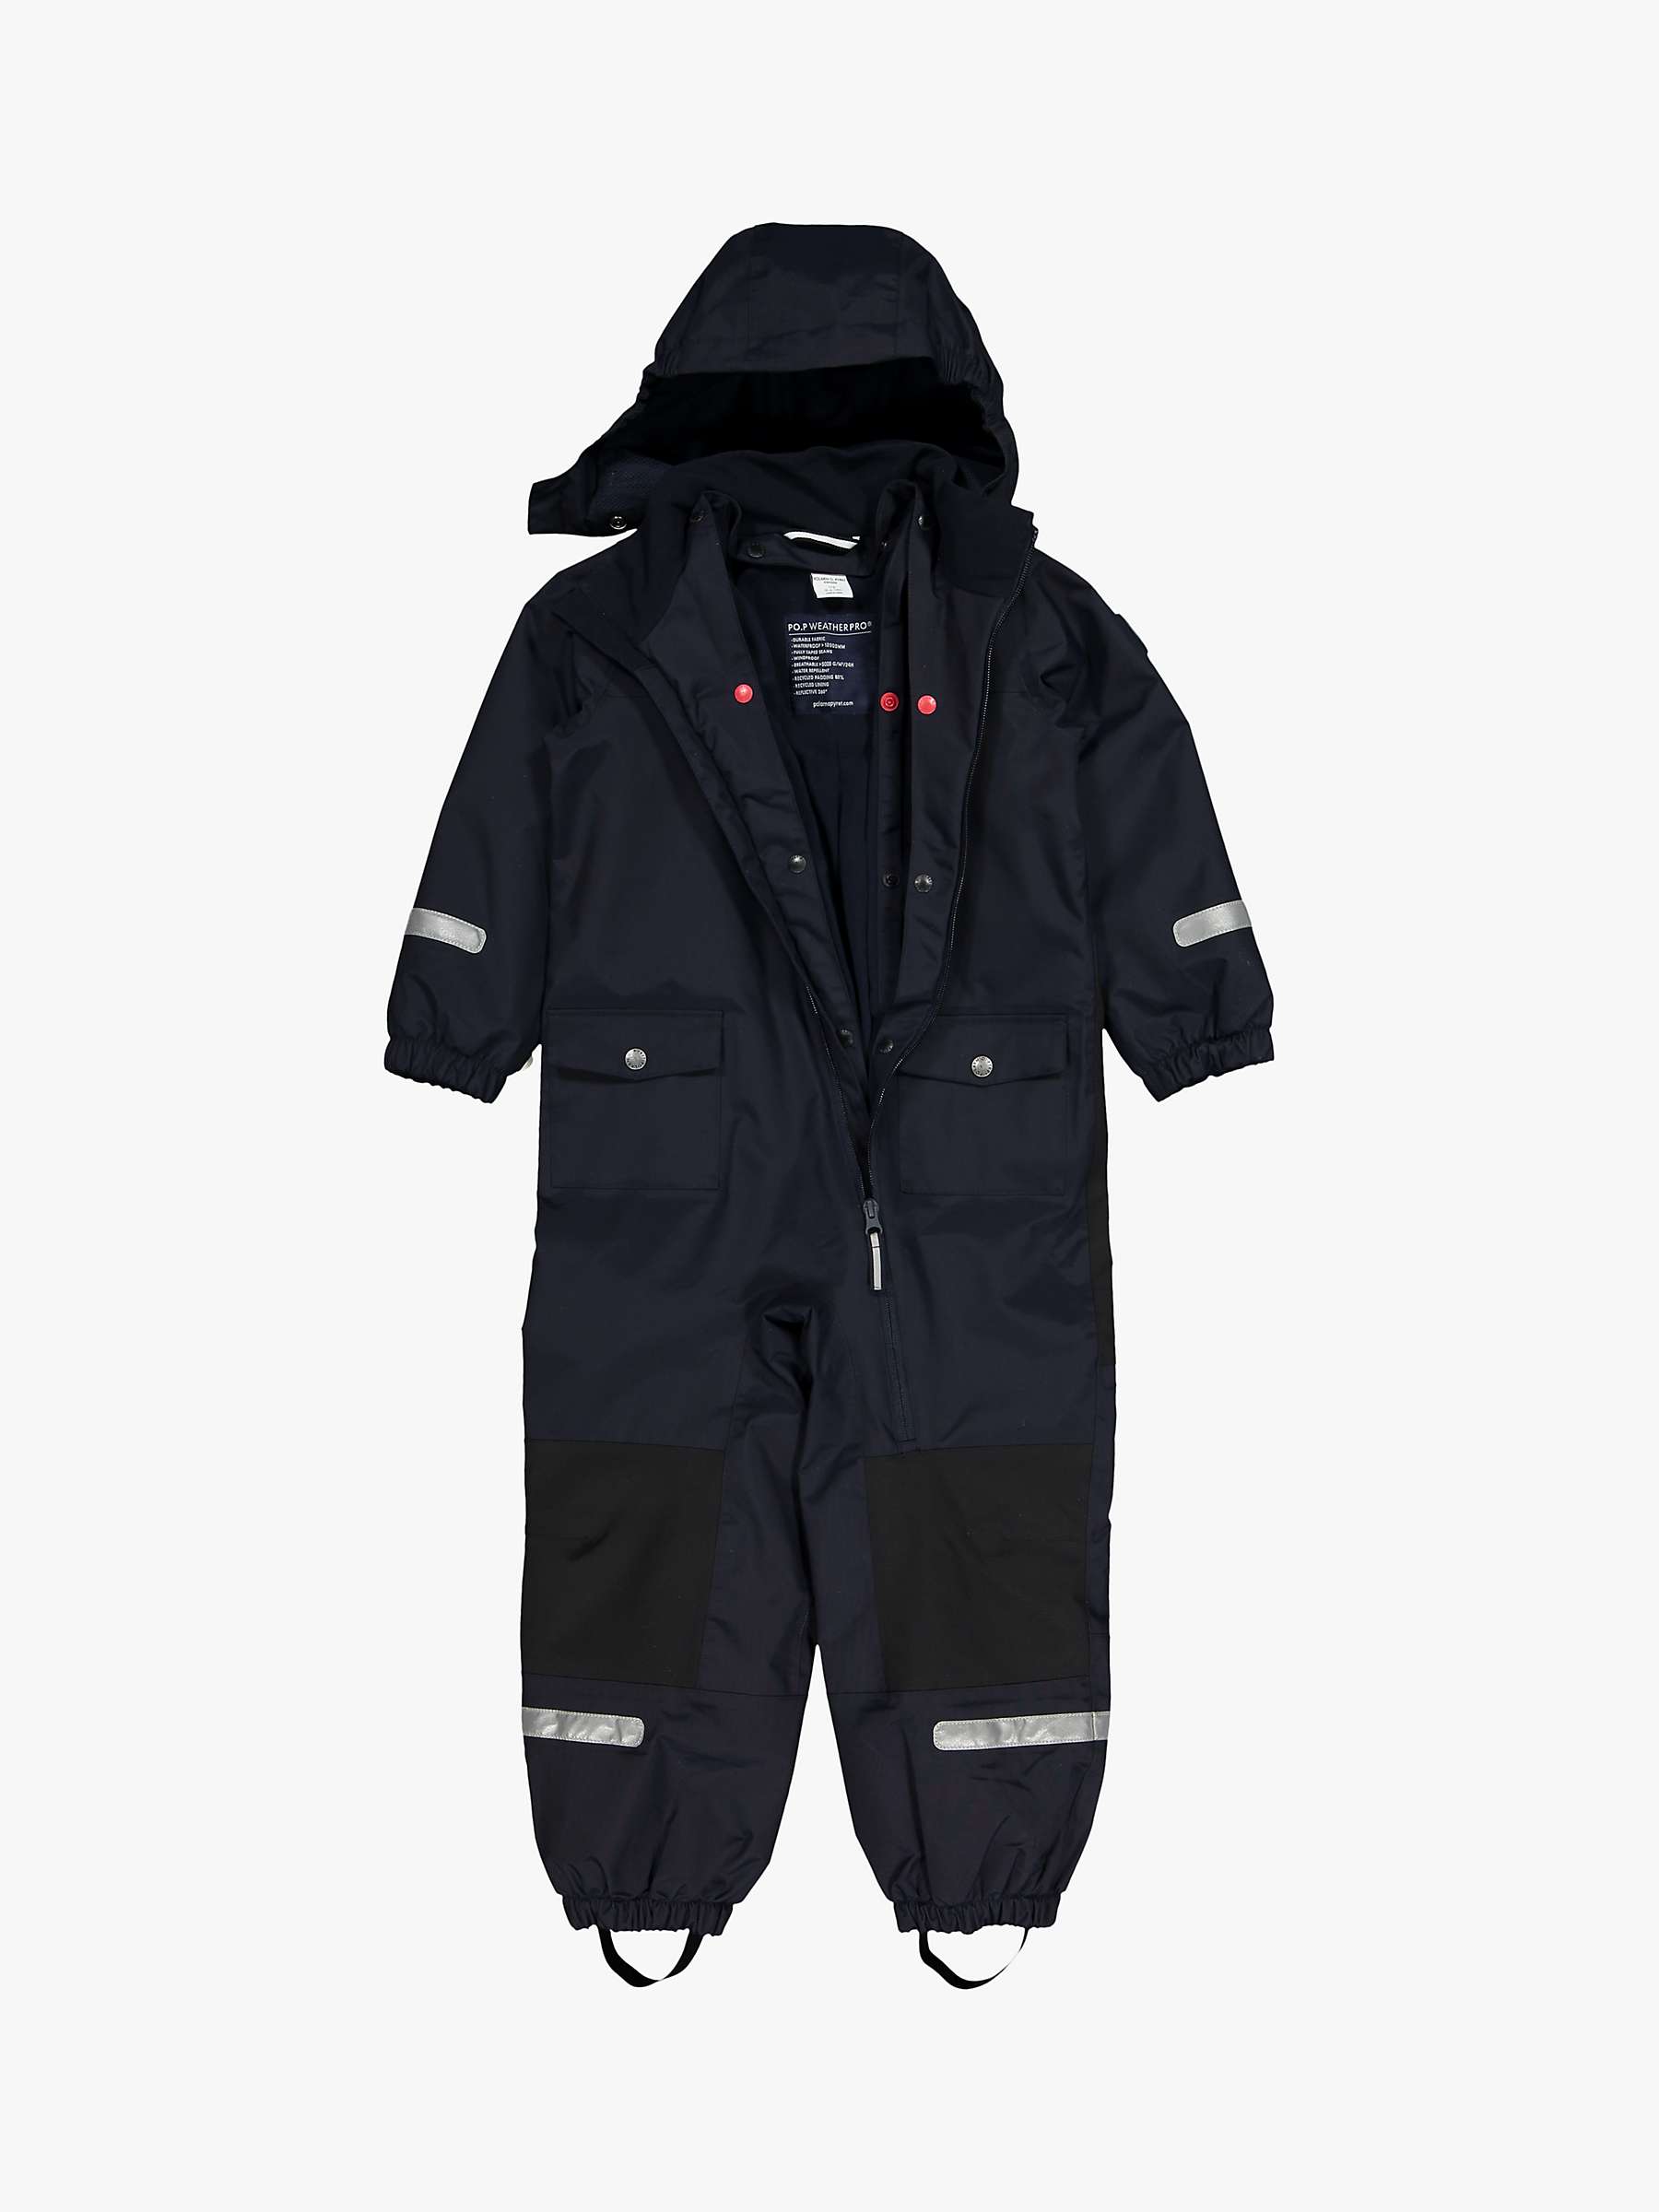 Buy Polarn O. Pyret Children's Waterproof Shell Overalls Online at johnlewis.com